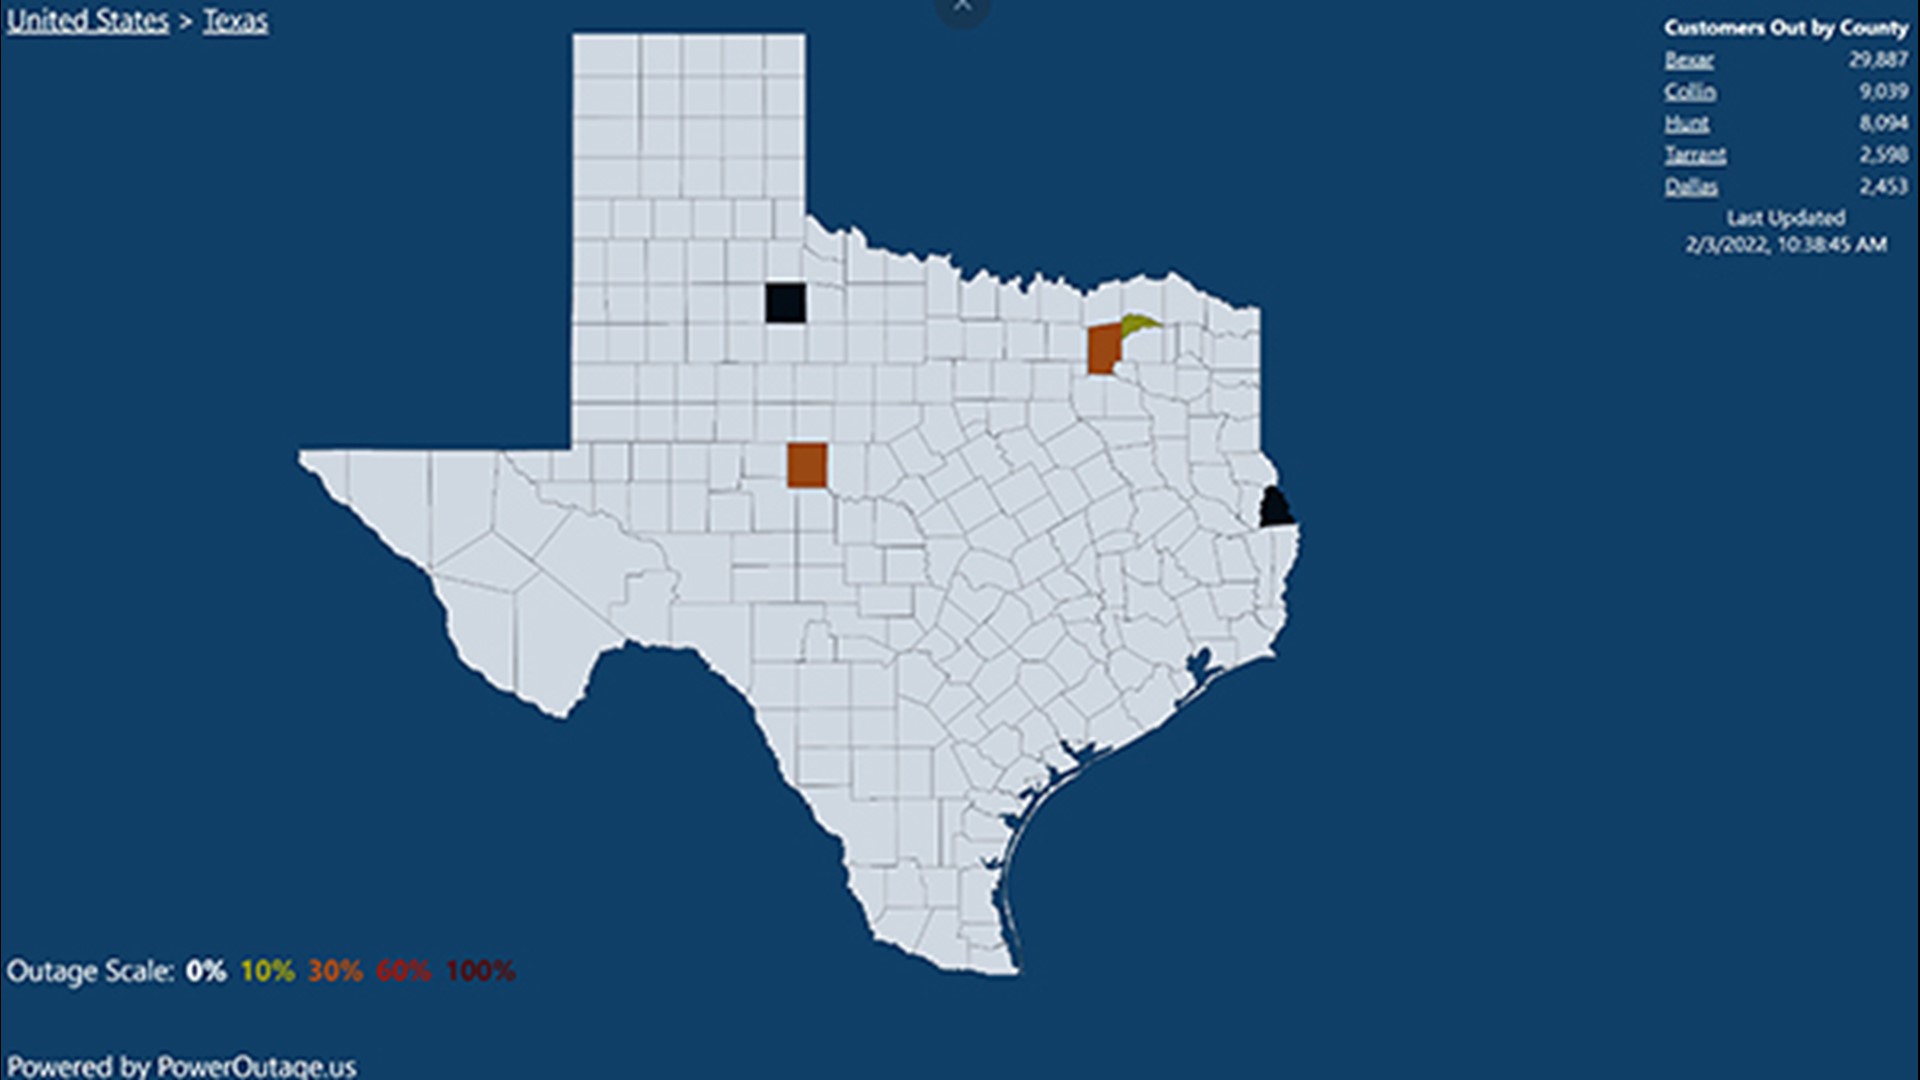 Texas power outages Interactive map shows outages